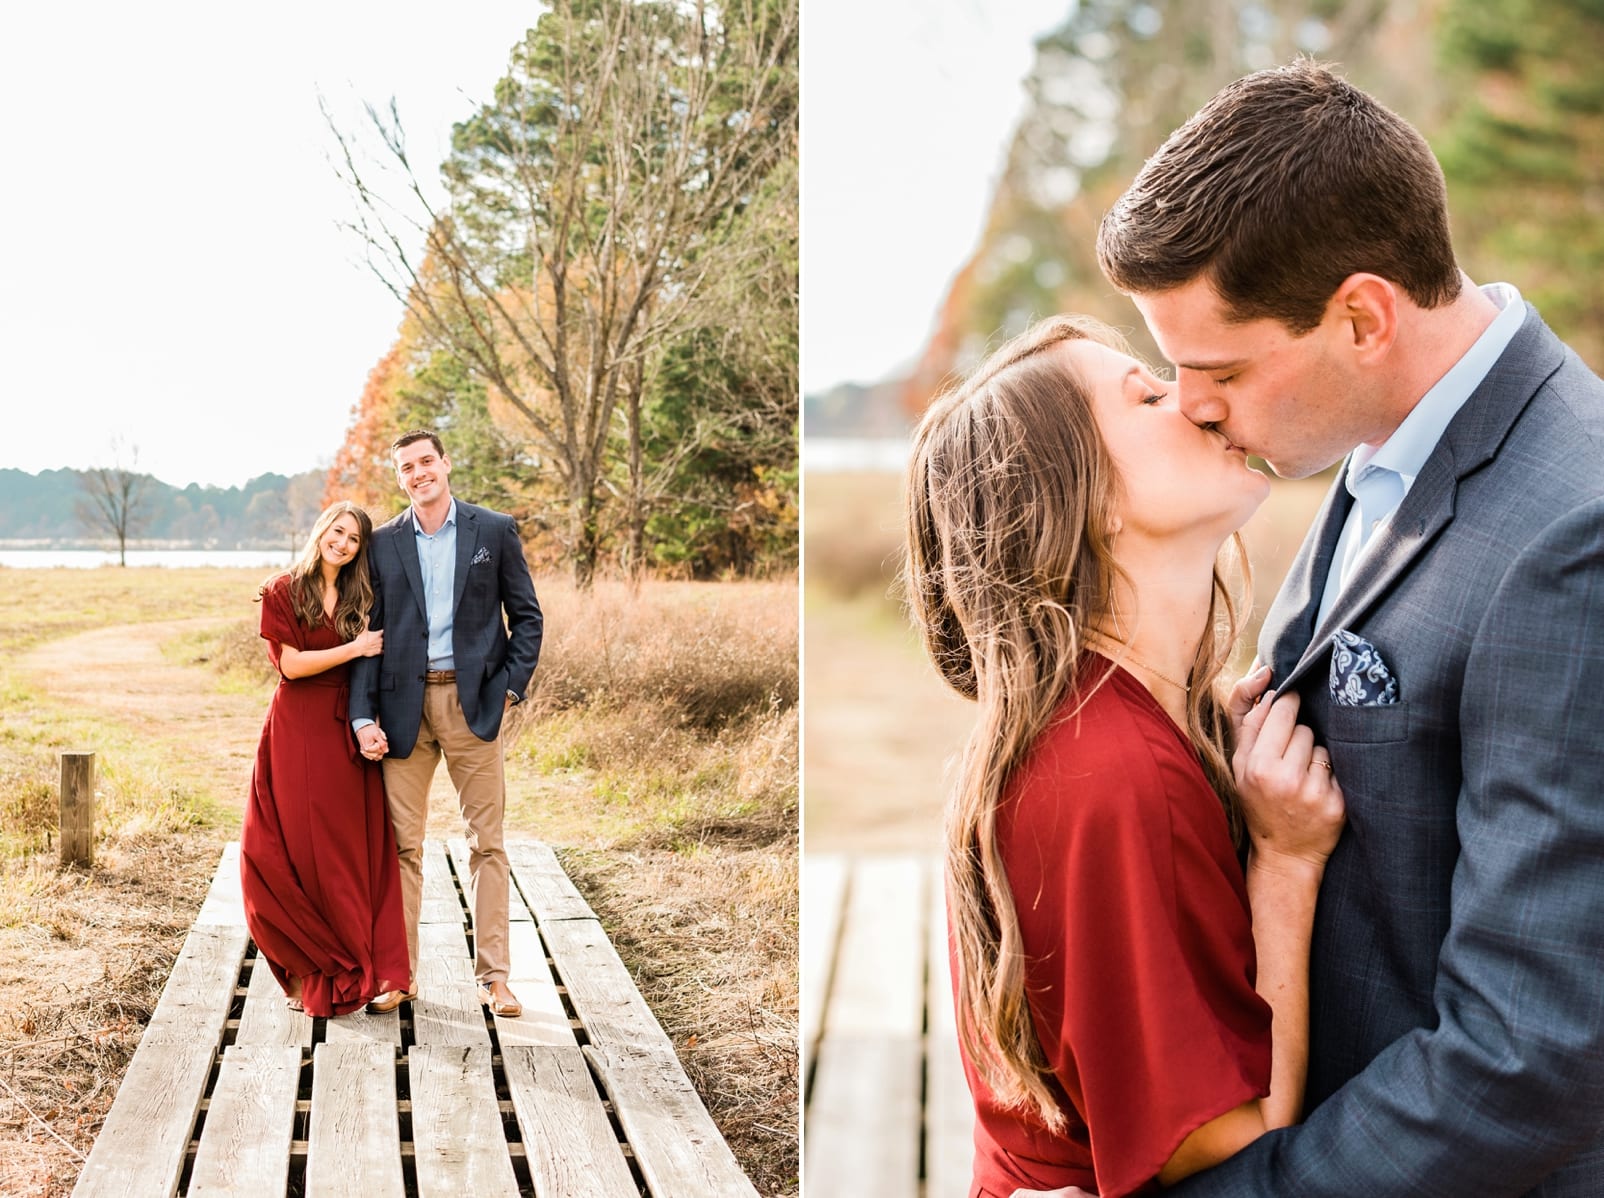 Raleigh couple walking together across a wooden boardwalk and then kissing photo